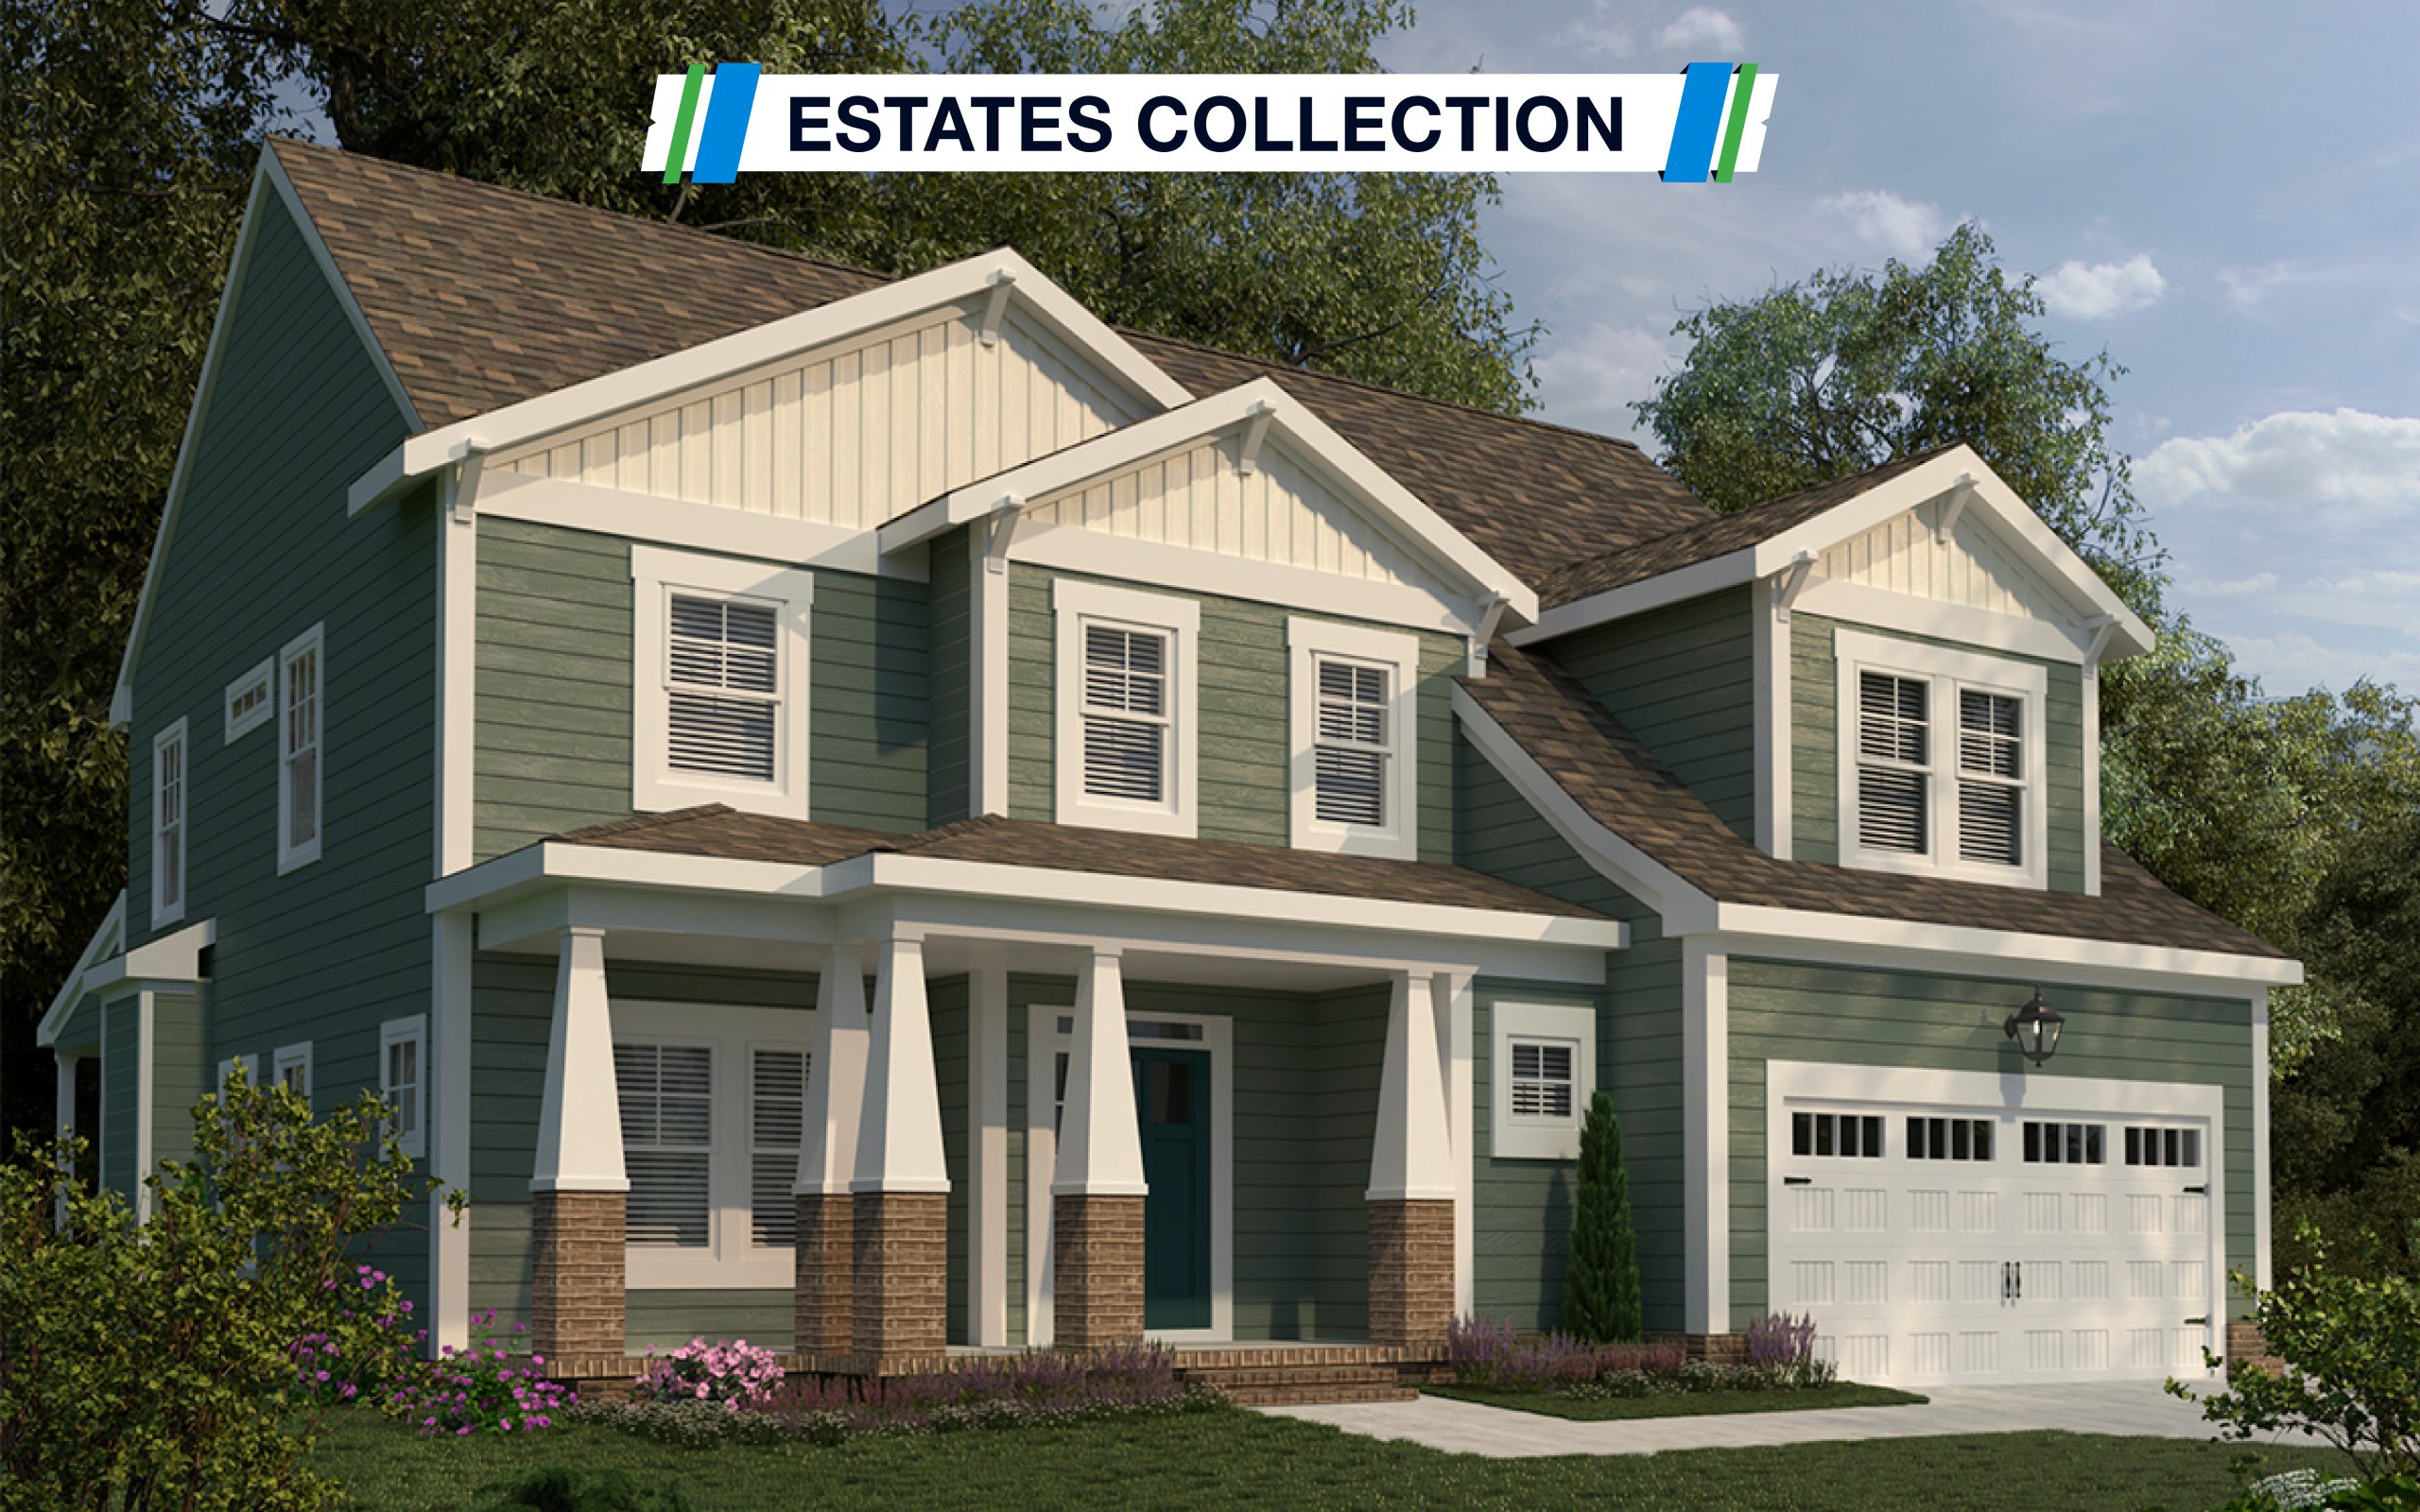 Image of the Siena Model - the Estates Collection. Hoe is green and white. Front view showing the 2 car garage eight windows and the front porch and door.